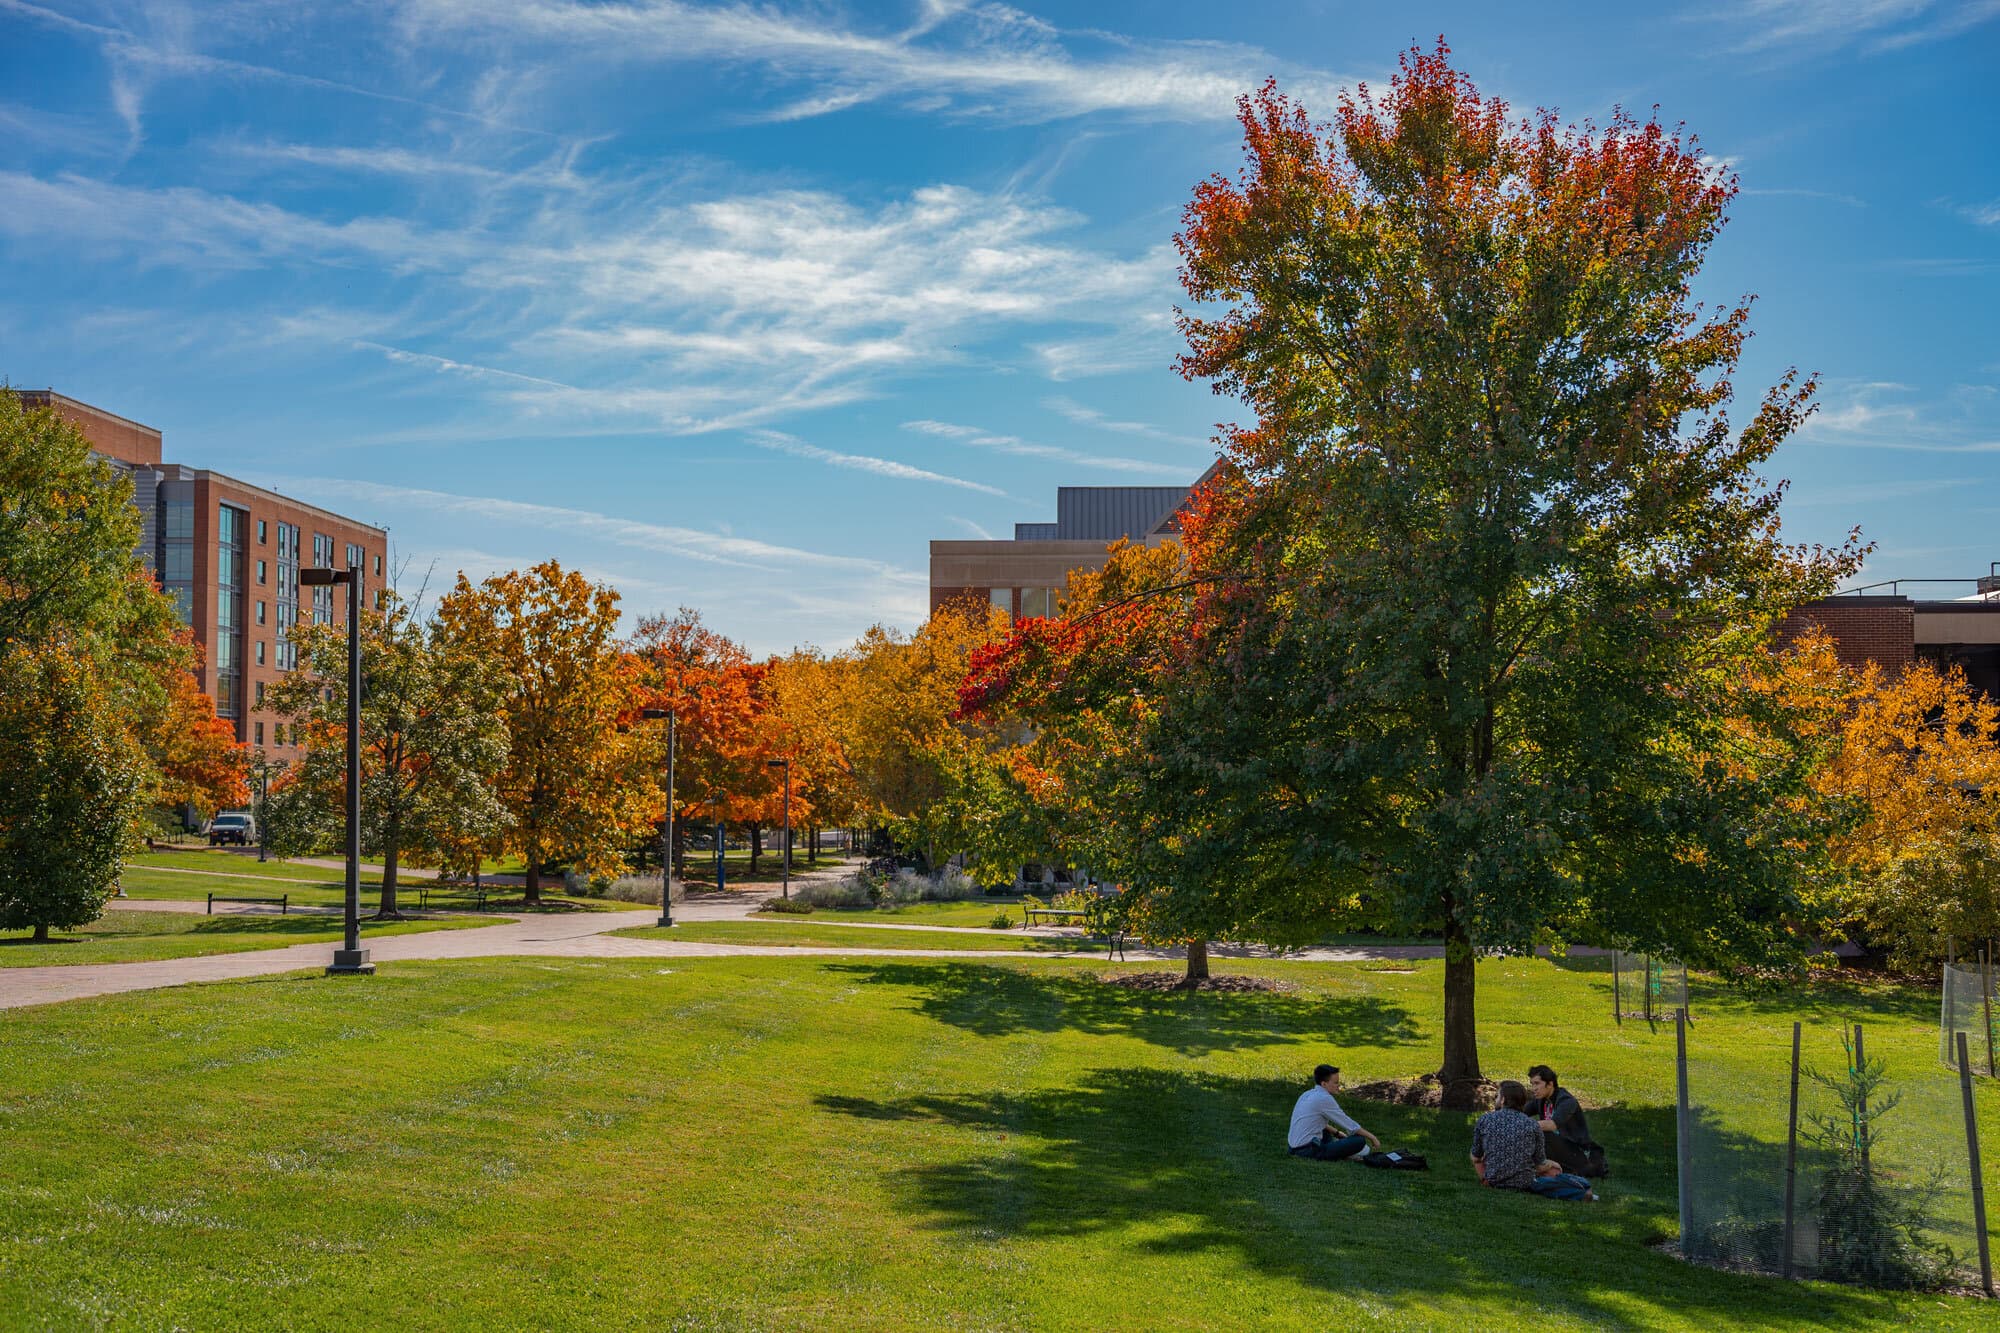 students sitting under a tree with green grass and buildings in the background